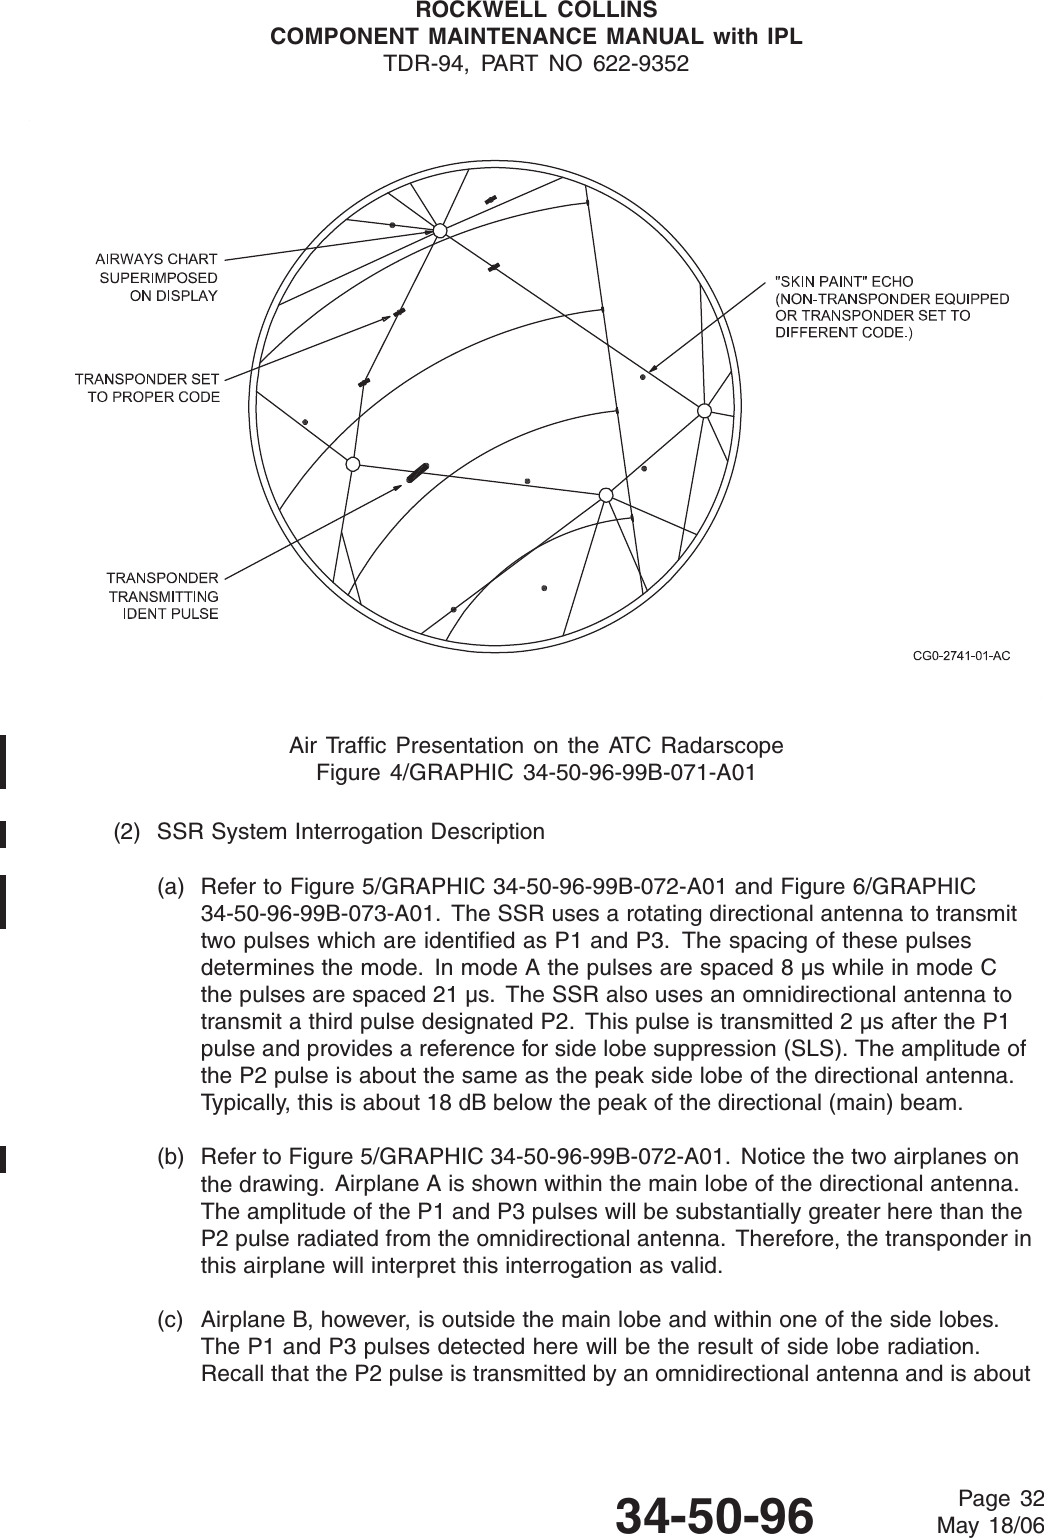 ROCKWELL COLLINSCOMPONENT MAINTENANCE MANUAL with IPLTDR-94, PART NO 622-9352Air Traffic Presentation on the ATC RadarscopeFigure 4/GRAPHIC 34-50-96-99B-071-A01(2) SSR System Interrogation Description(a) Refer to Figure 5/GRAPHIC 34-50-96-99B-072-A01 and Figure 6/GRAPHIC34-50-96-99B-073-A01. The SSR uses a rotating directional antenna to transmittwo pulses which are identified as P1 and P3. The spacing of these pulsesdetermines the mode. In mode A the pulses are spaced 8 μs while in mode Cthe pulses are spaced 21 μs. The SSR also uses an omnidirectional antenna totransmit a third pulse designated P2. This pulse is transmitted 2 μs after the P1pulse and provides a reference for side lobe suppression (SLS). The amplitude ofthe P2 pulse is about the same as the peak side lobe of the directional antenna.Ty p i c ally, this is about 18 dB below the peak of the directional (main) beam.(b) Refer to Figure 5/GRAPHIC 34-50-96-99B-072-A01. Notice the two airplanes onthe drawing. Airplane A is shown within the main lobe of the directional antenna.The amplitude of the P1 and P3 pulses will be substantially greater here than theP2 pulse radiated from the omnidirectional antenna. Therefore, the transponder inthis airplane will interpret this interrogation as valid.(c) Airplane B, however, is outside the main lobe and within one of the side lobes.The P1 and P3 pulses detected here will be the result of side lobe radiation.Recall that the P2 pulse is transmitted by an omnidirectional antenna and is about34-50-96 Page 32May 18/06